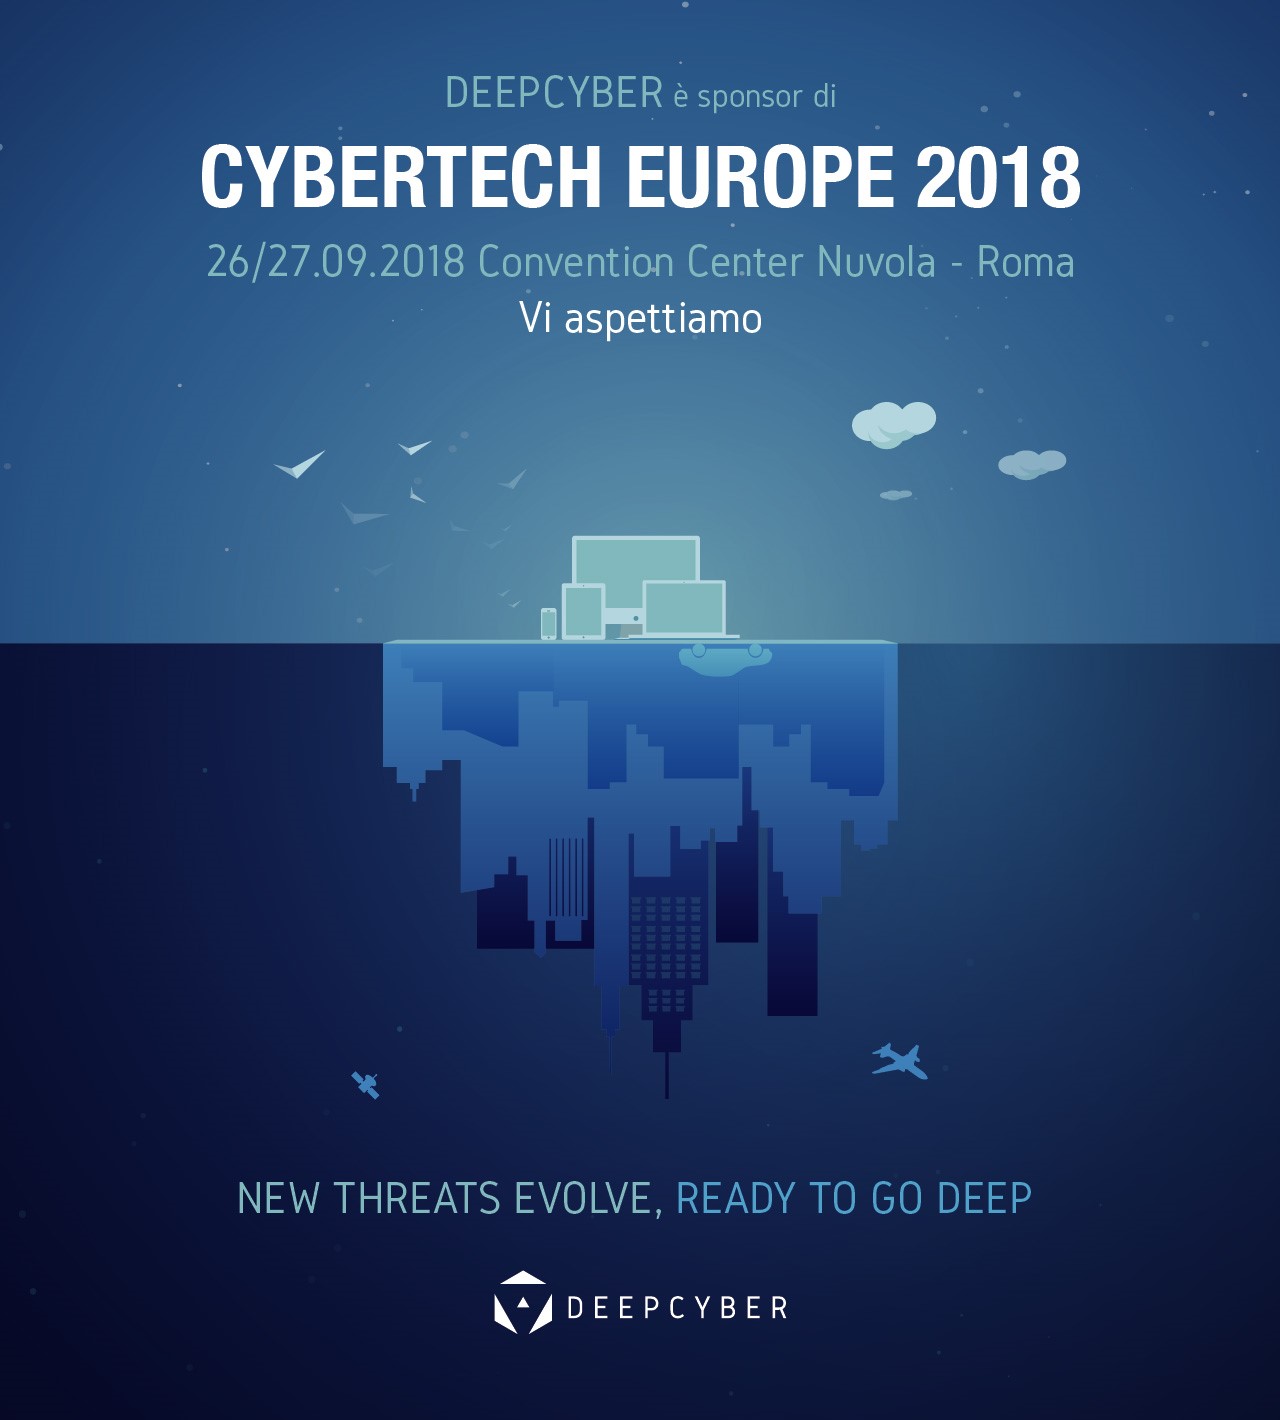 REPORT DEEPCYBER & GROUP-IB - CYBERTECH EUROPE CONFERENCE 2018